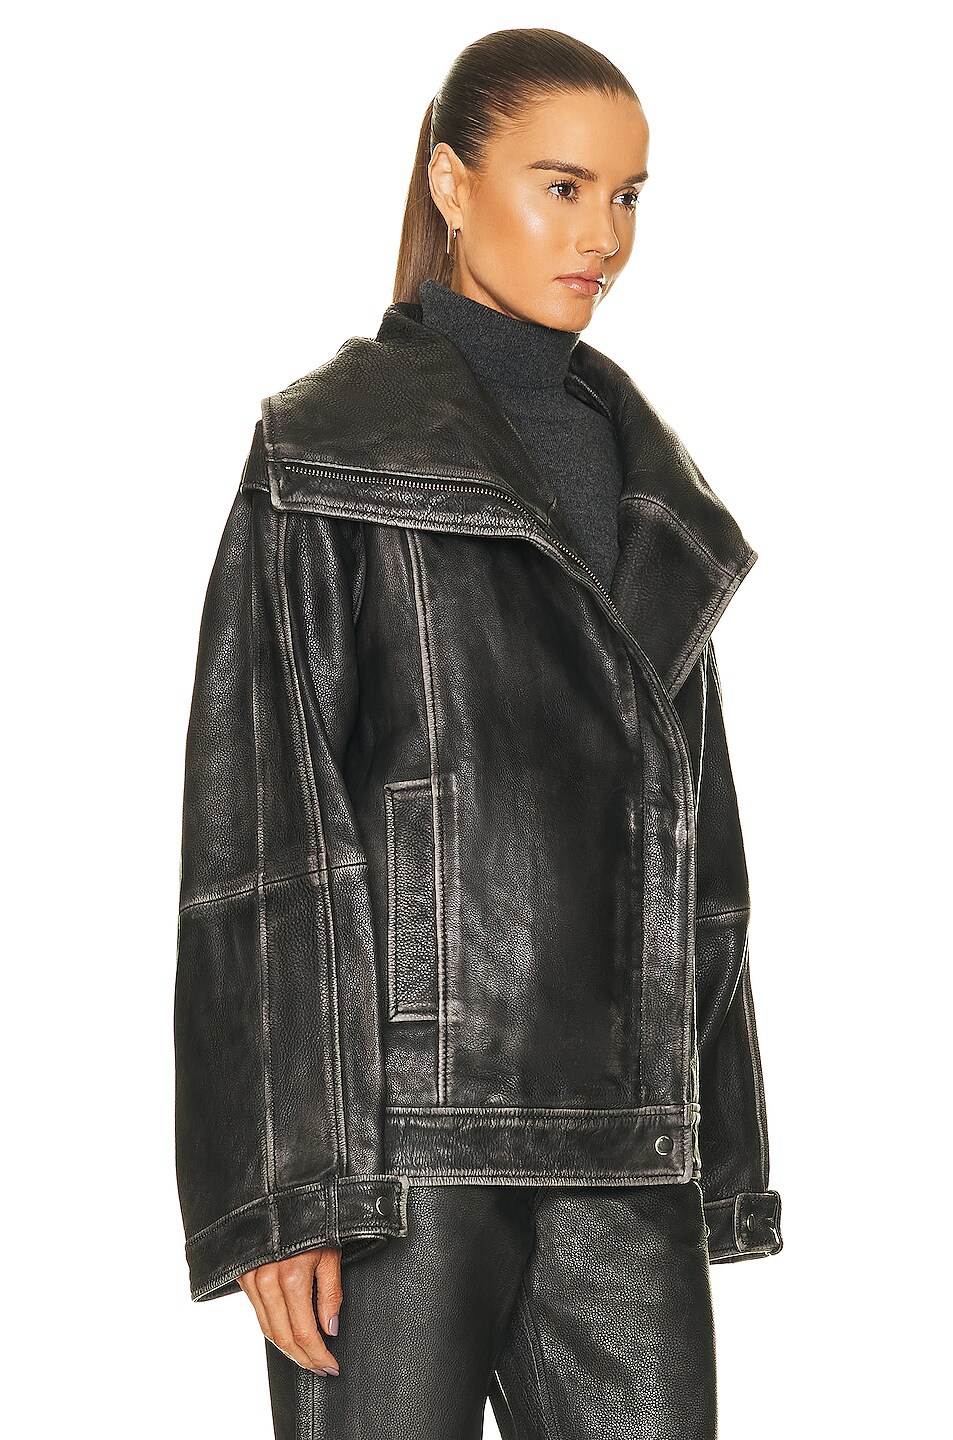 REMAIN Washed Leather Jacket in Black | FWRD